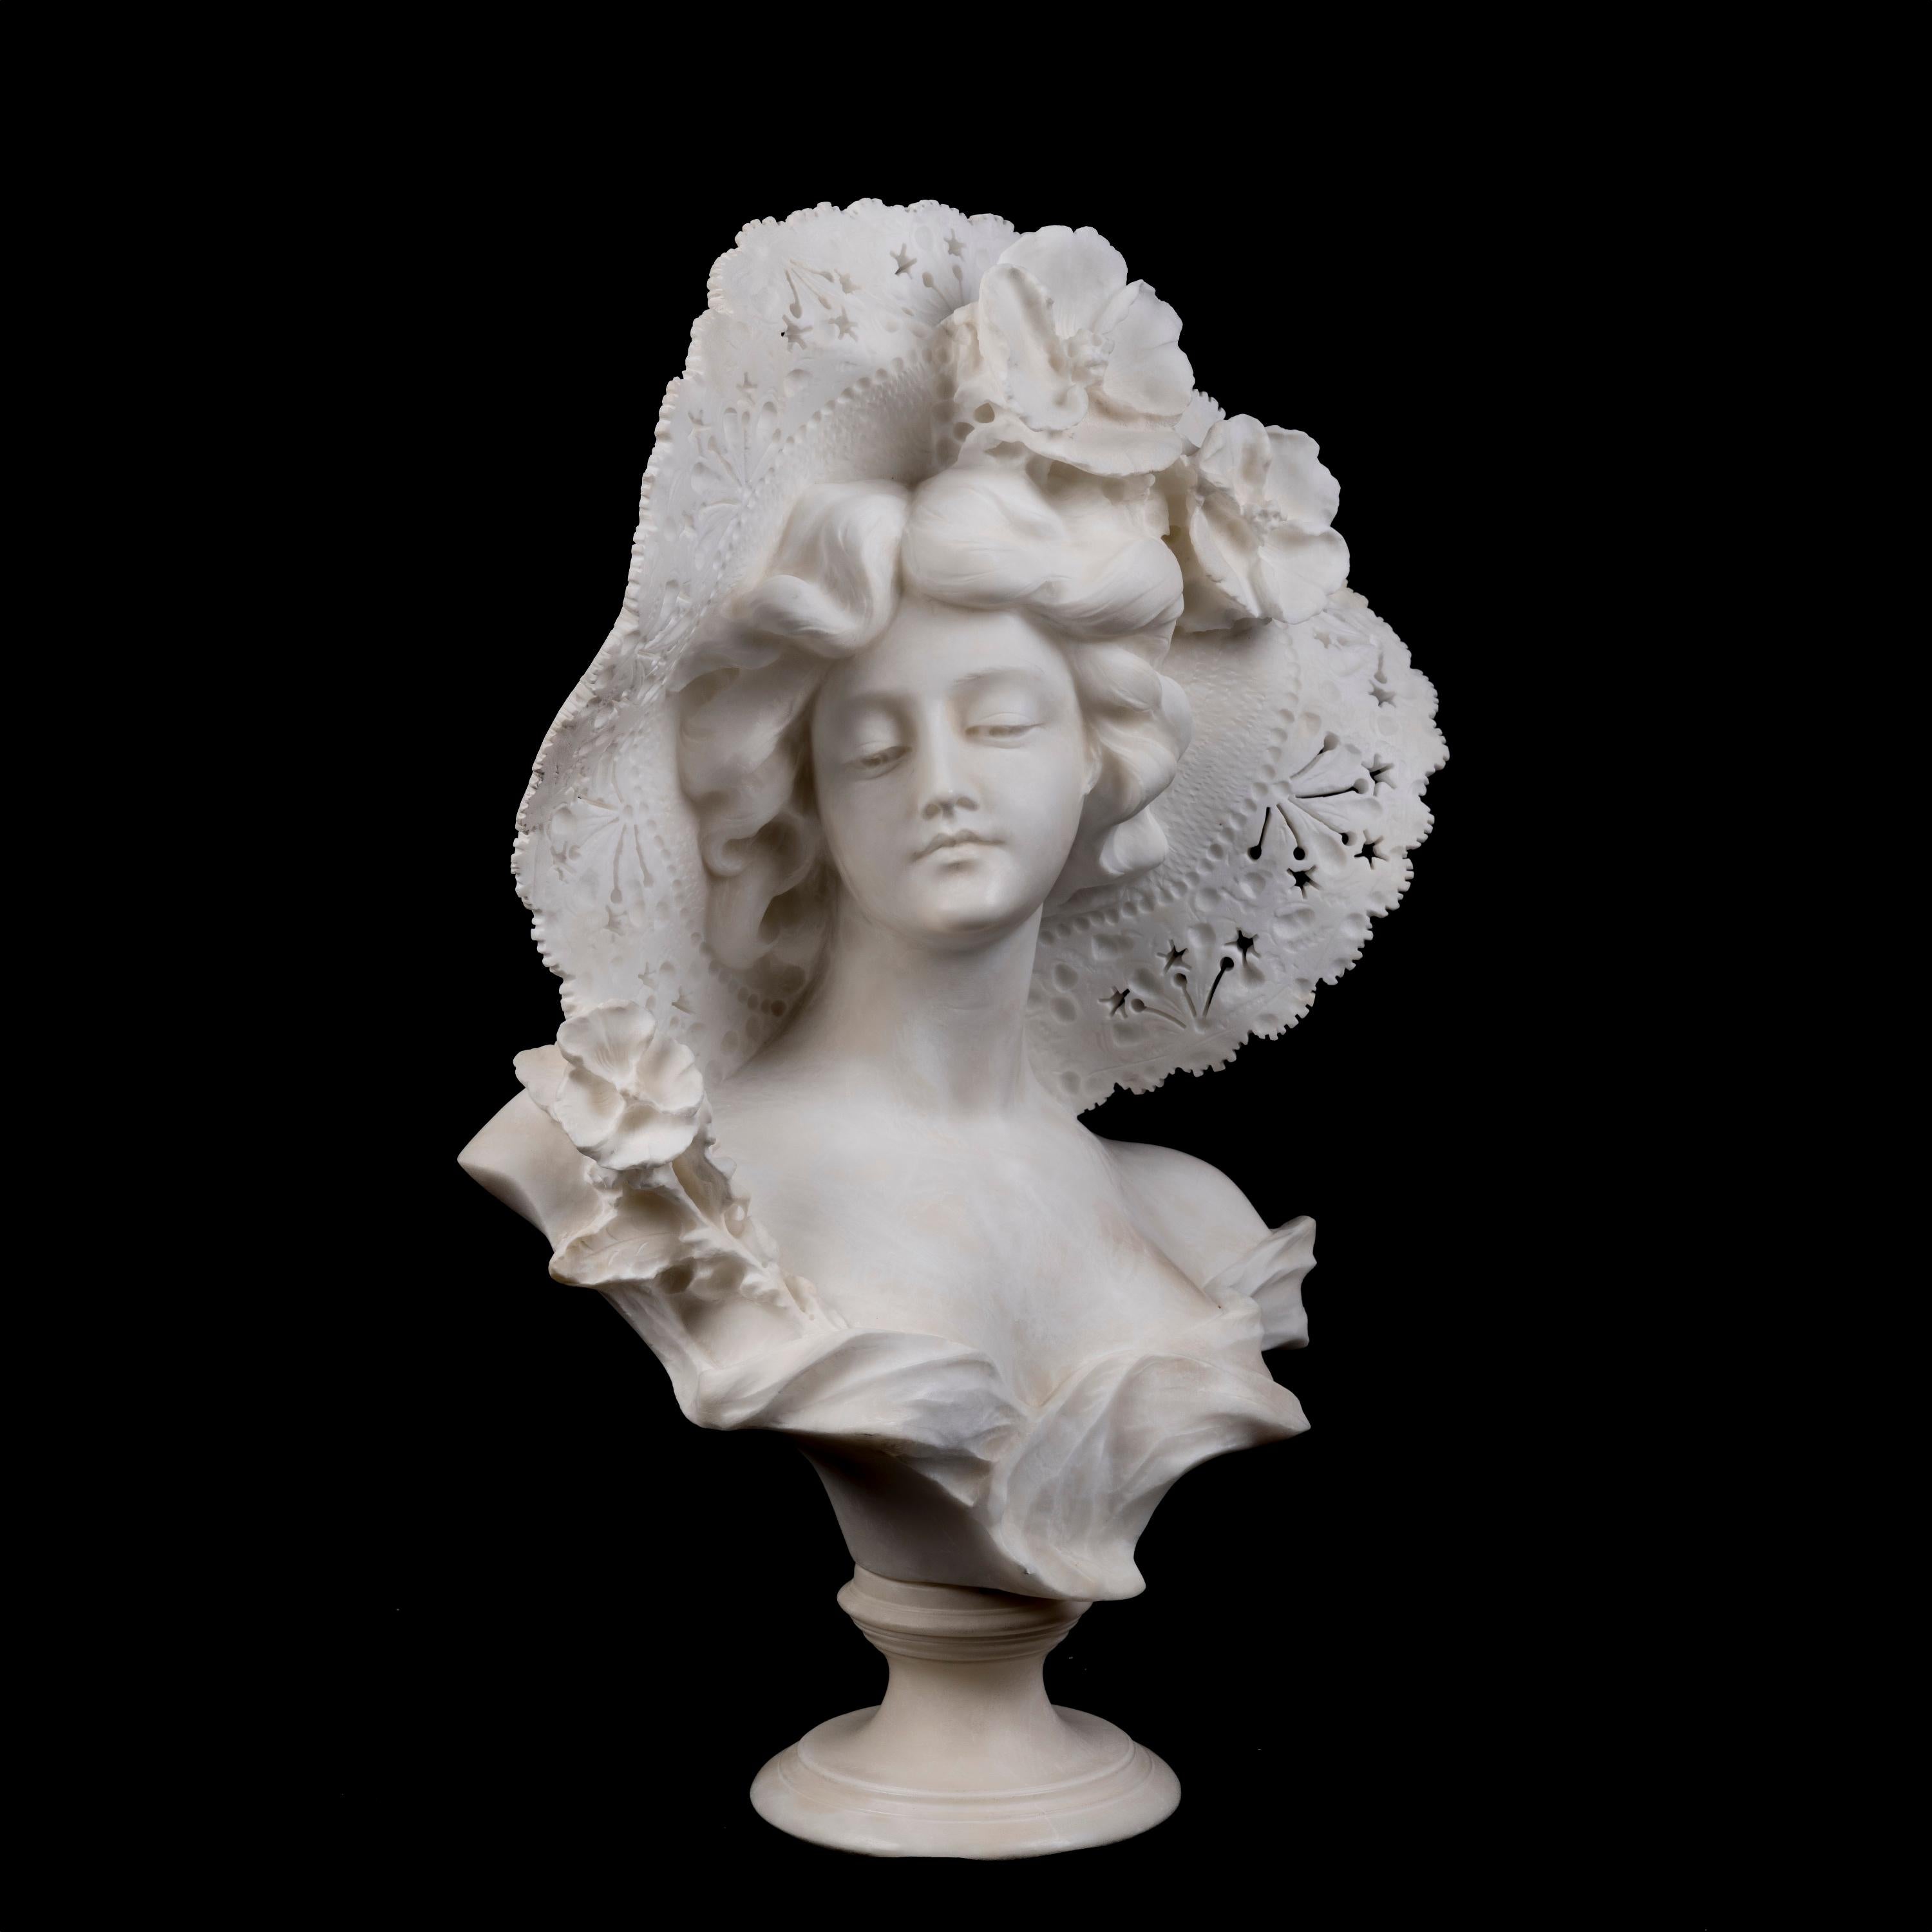 Alabaster Bust of an Elegant Lady
Adolfo Cipriani

The alabaster bust supported on a circular socle, modelled as a lady wearing a fashionable hat adorned with flowers. Signed 